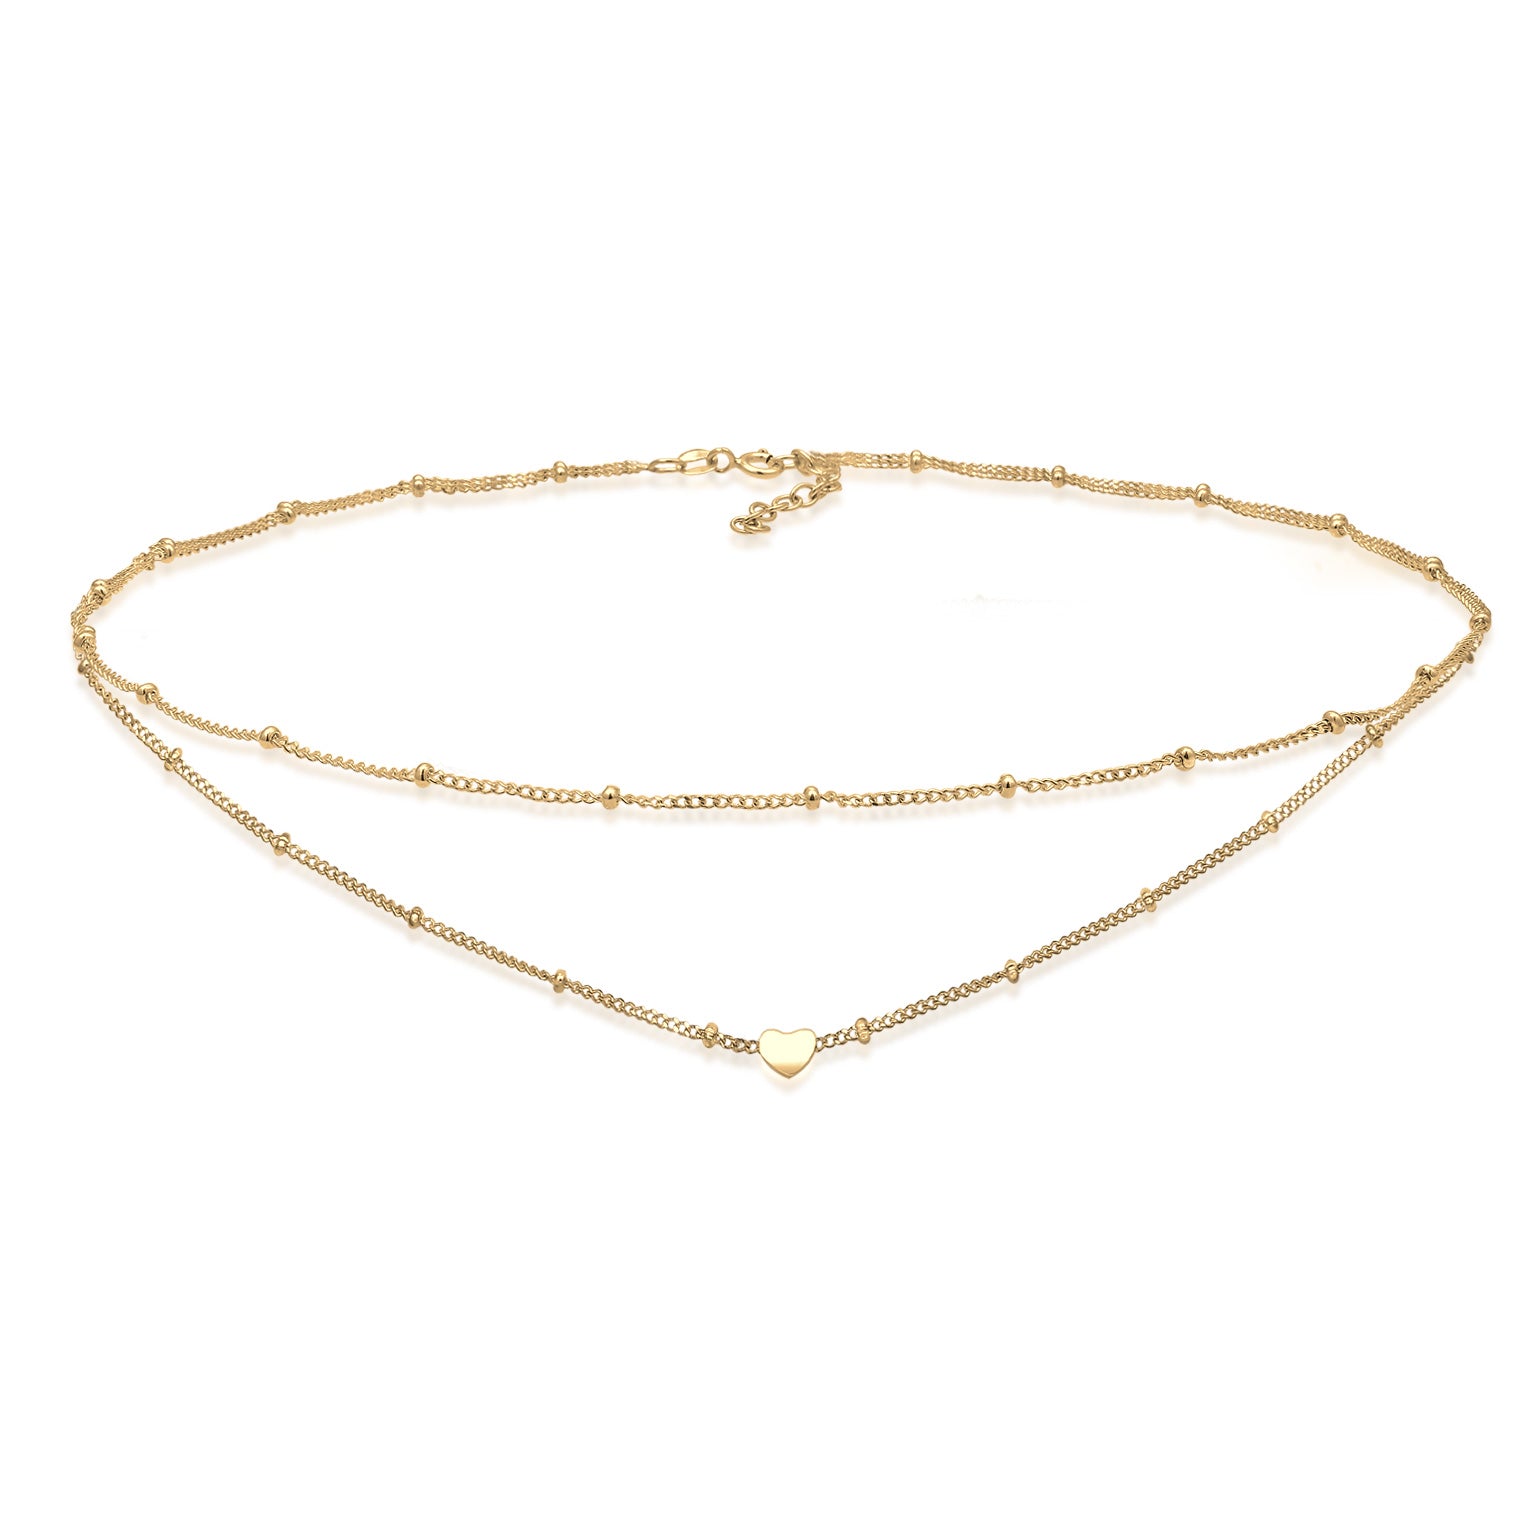 Trendy choker necklaces a Elli with – Now Elli | must-have Jewelry